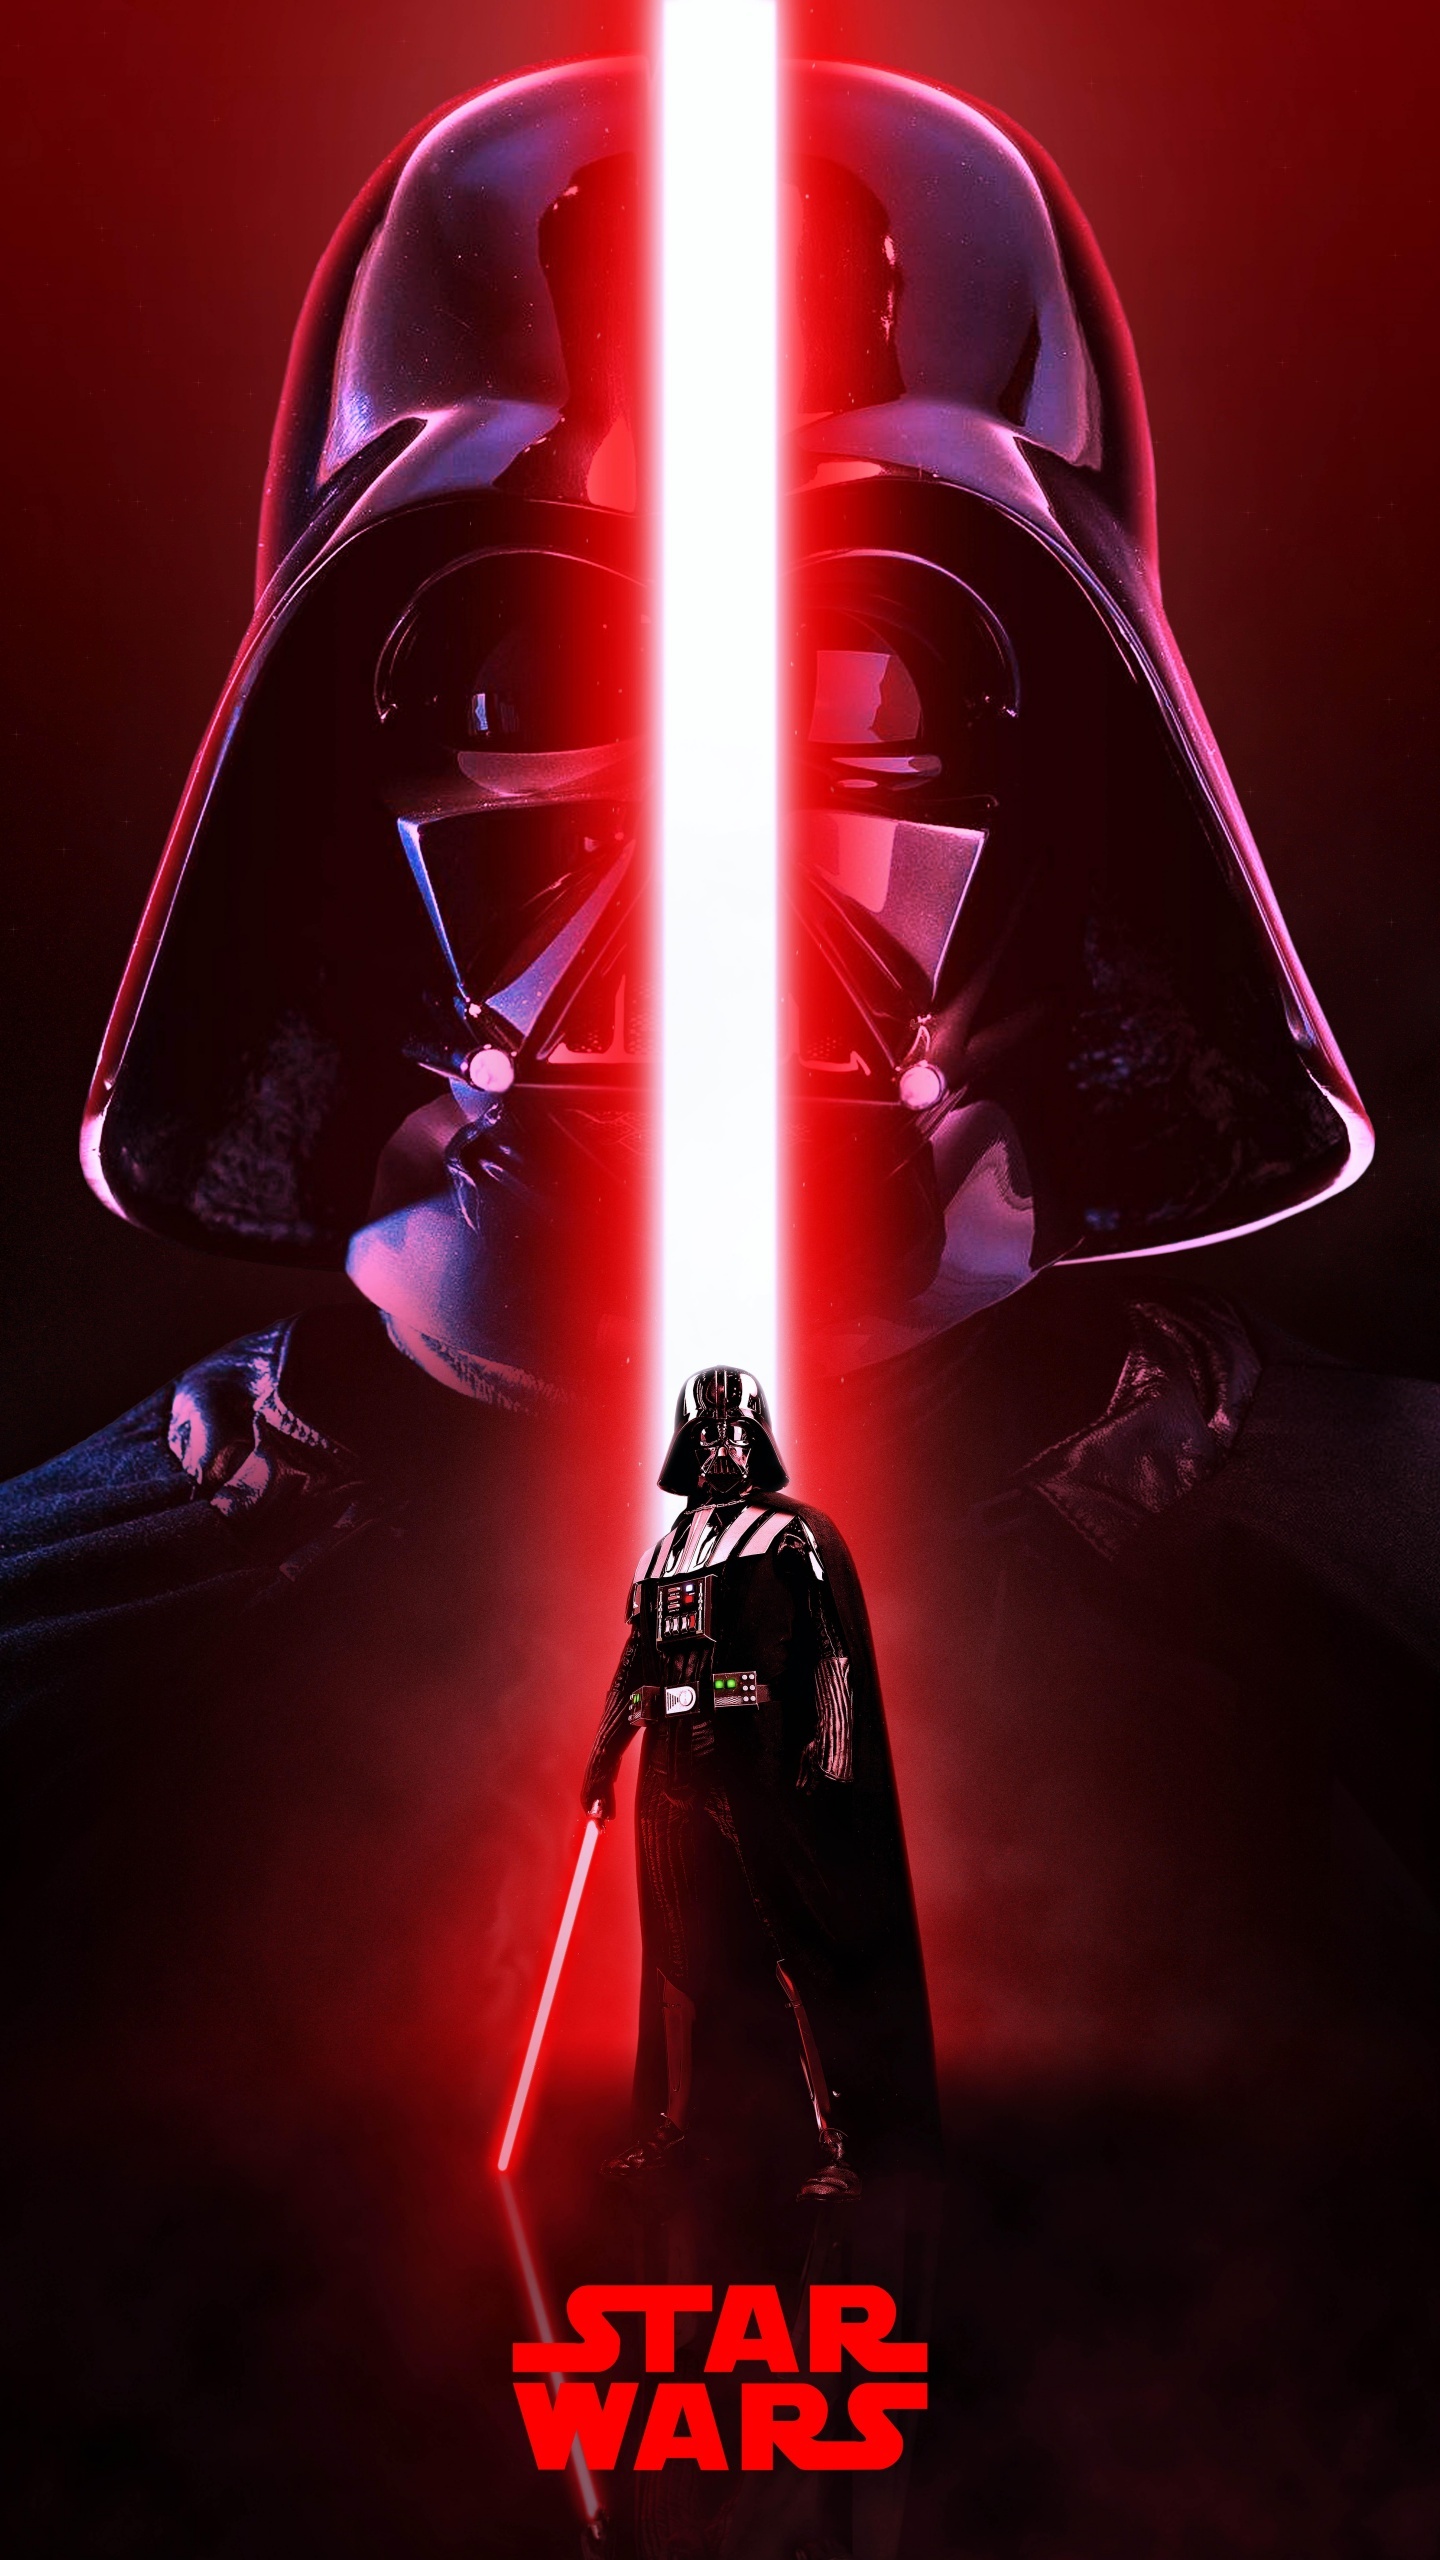 Sith: Darth Vader, A master of the dark side of the Force, Lightsaber, Star Wars. 1440x2560 HD Wallpaper.